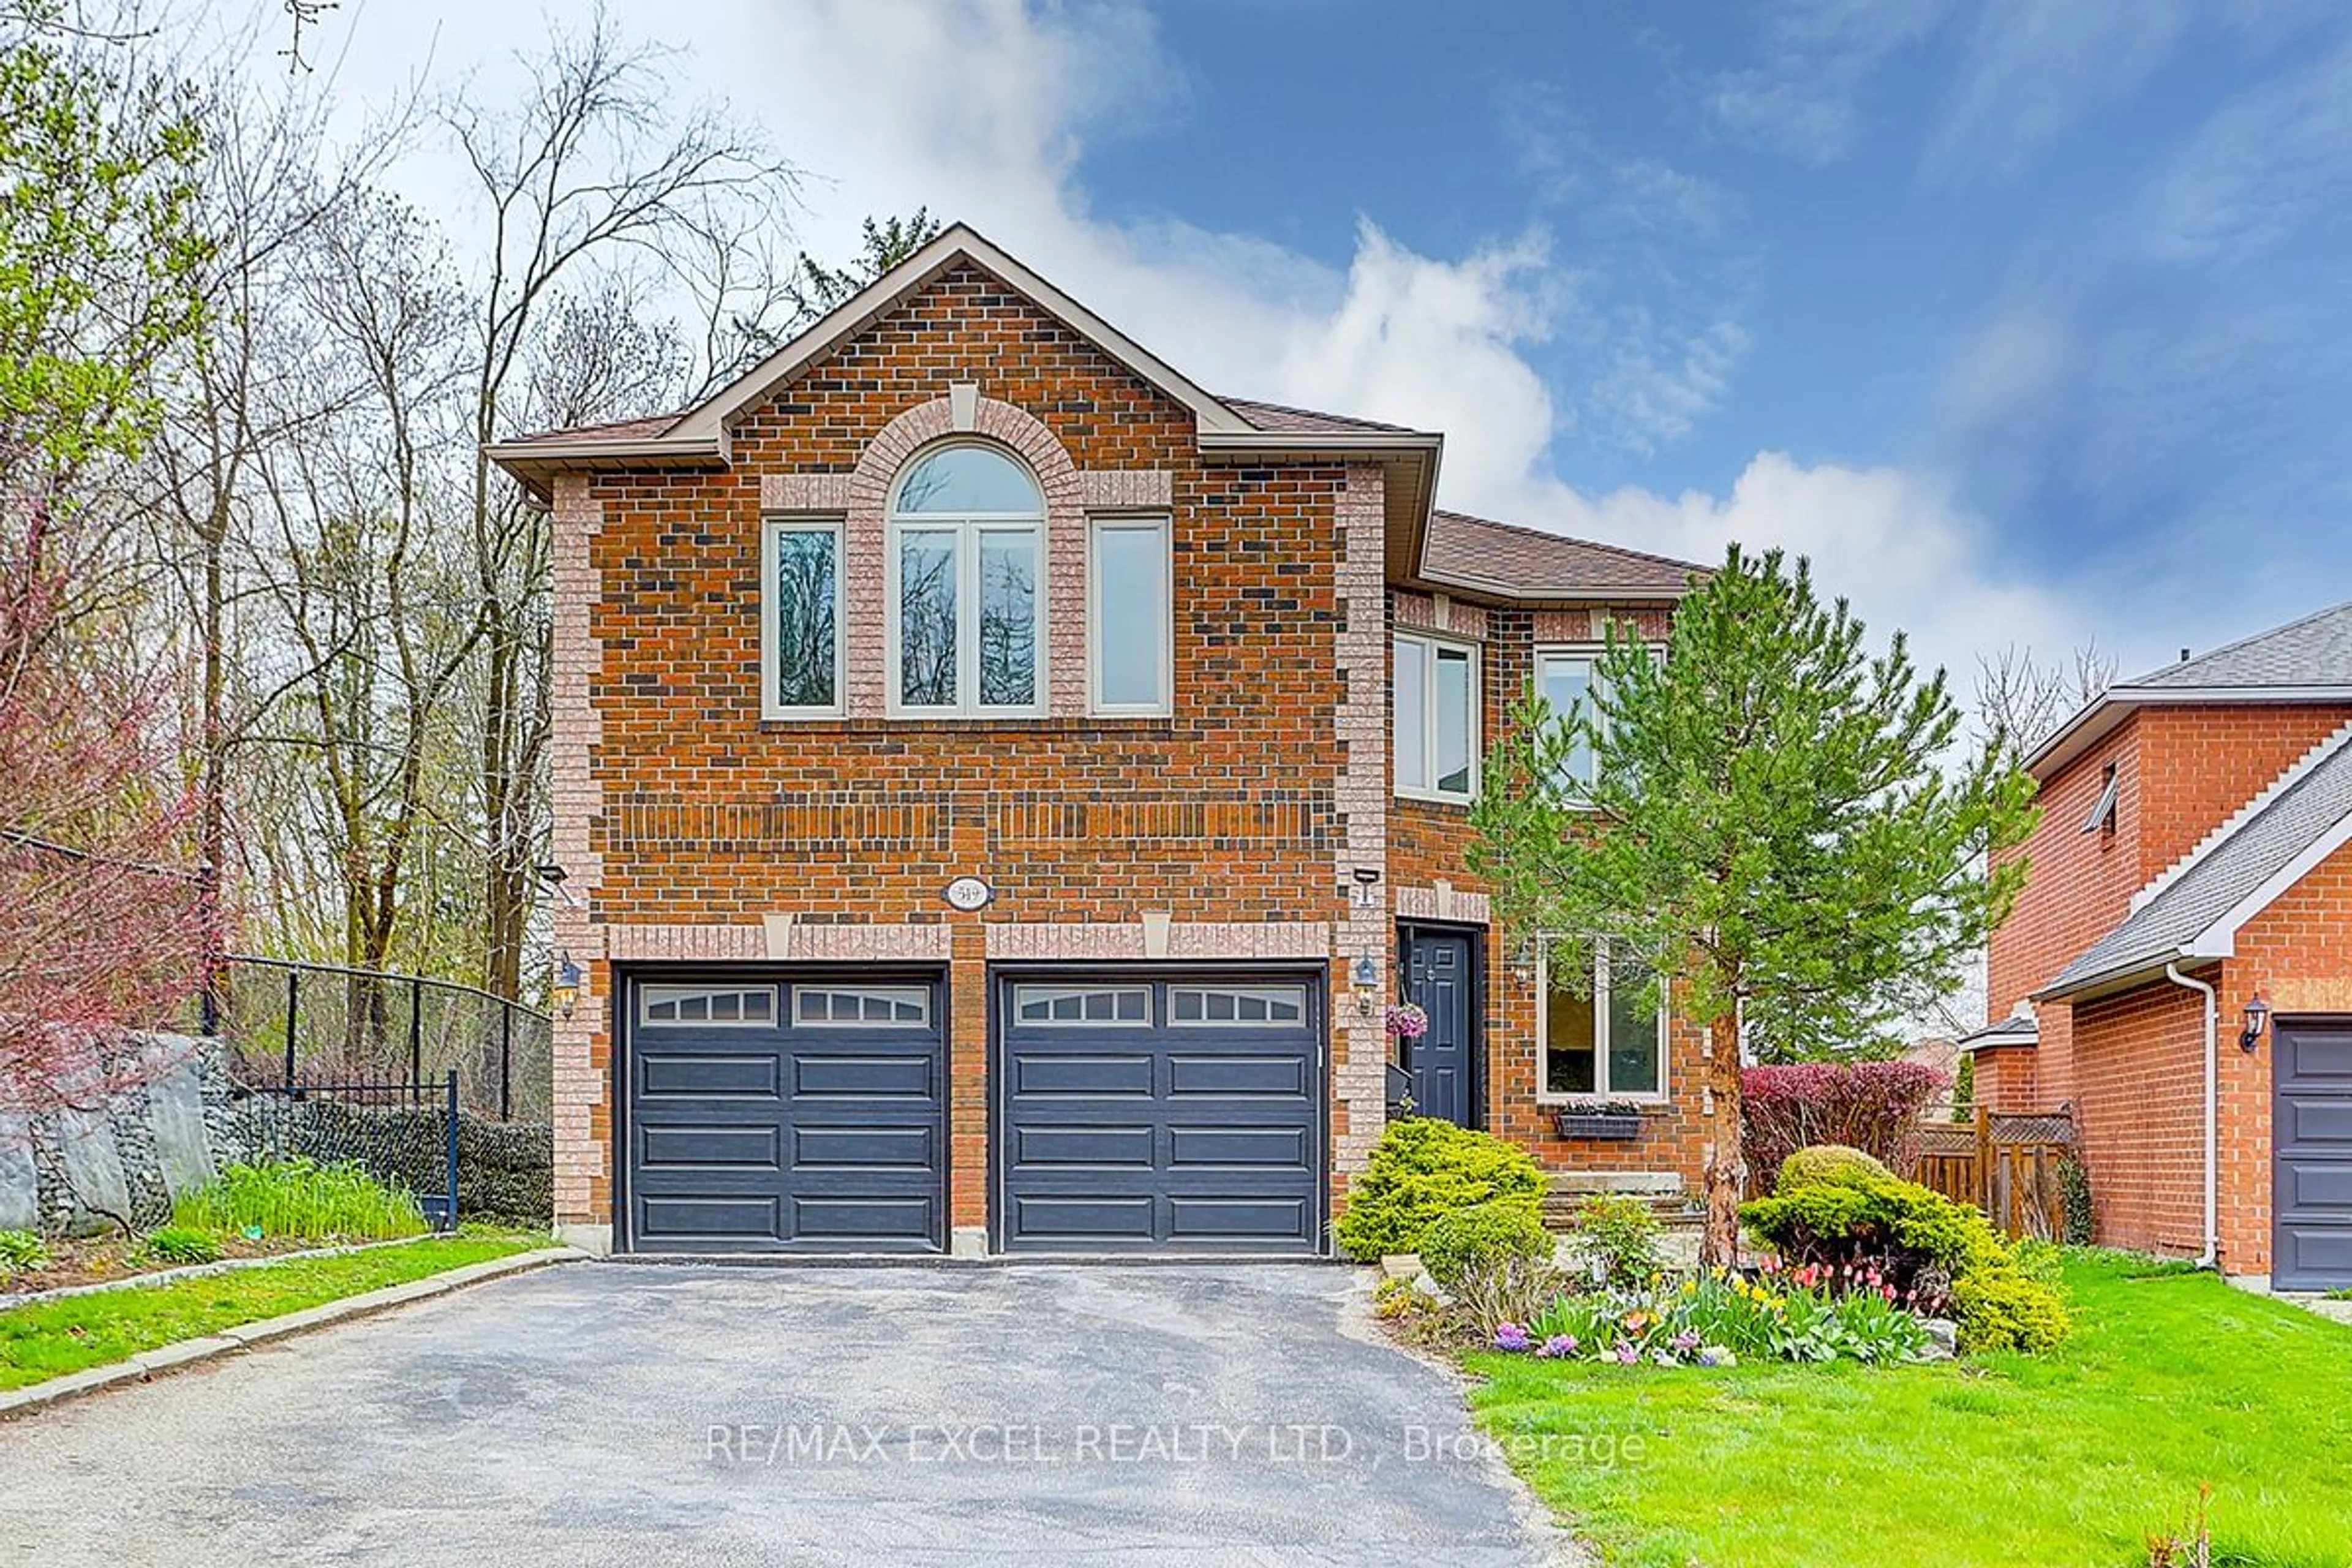 Home with brick exterior material for 519 Londry Crt, Newmarket Ontario L3Y 8M3